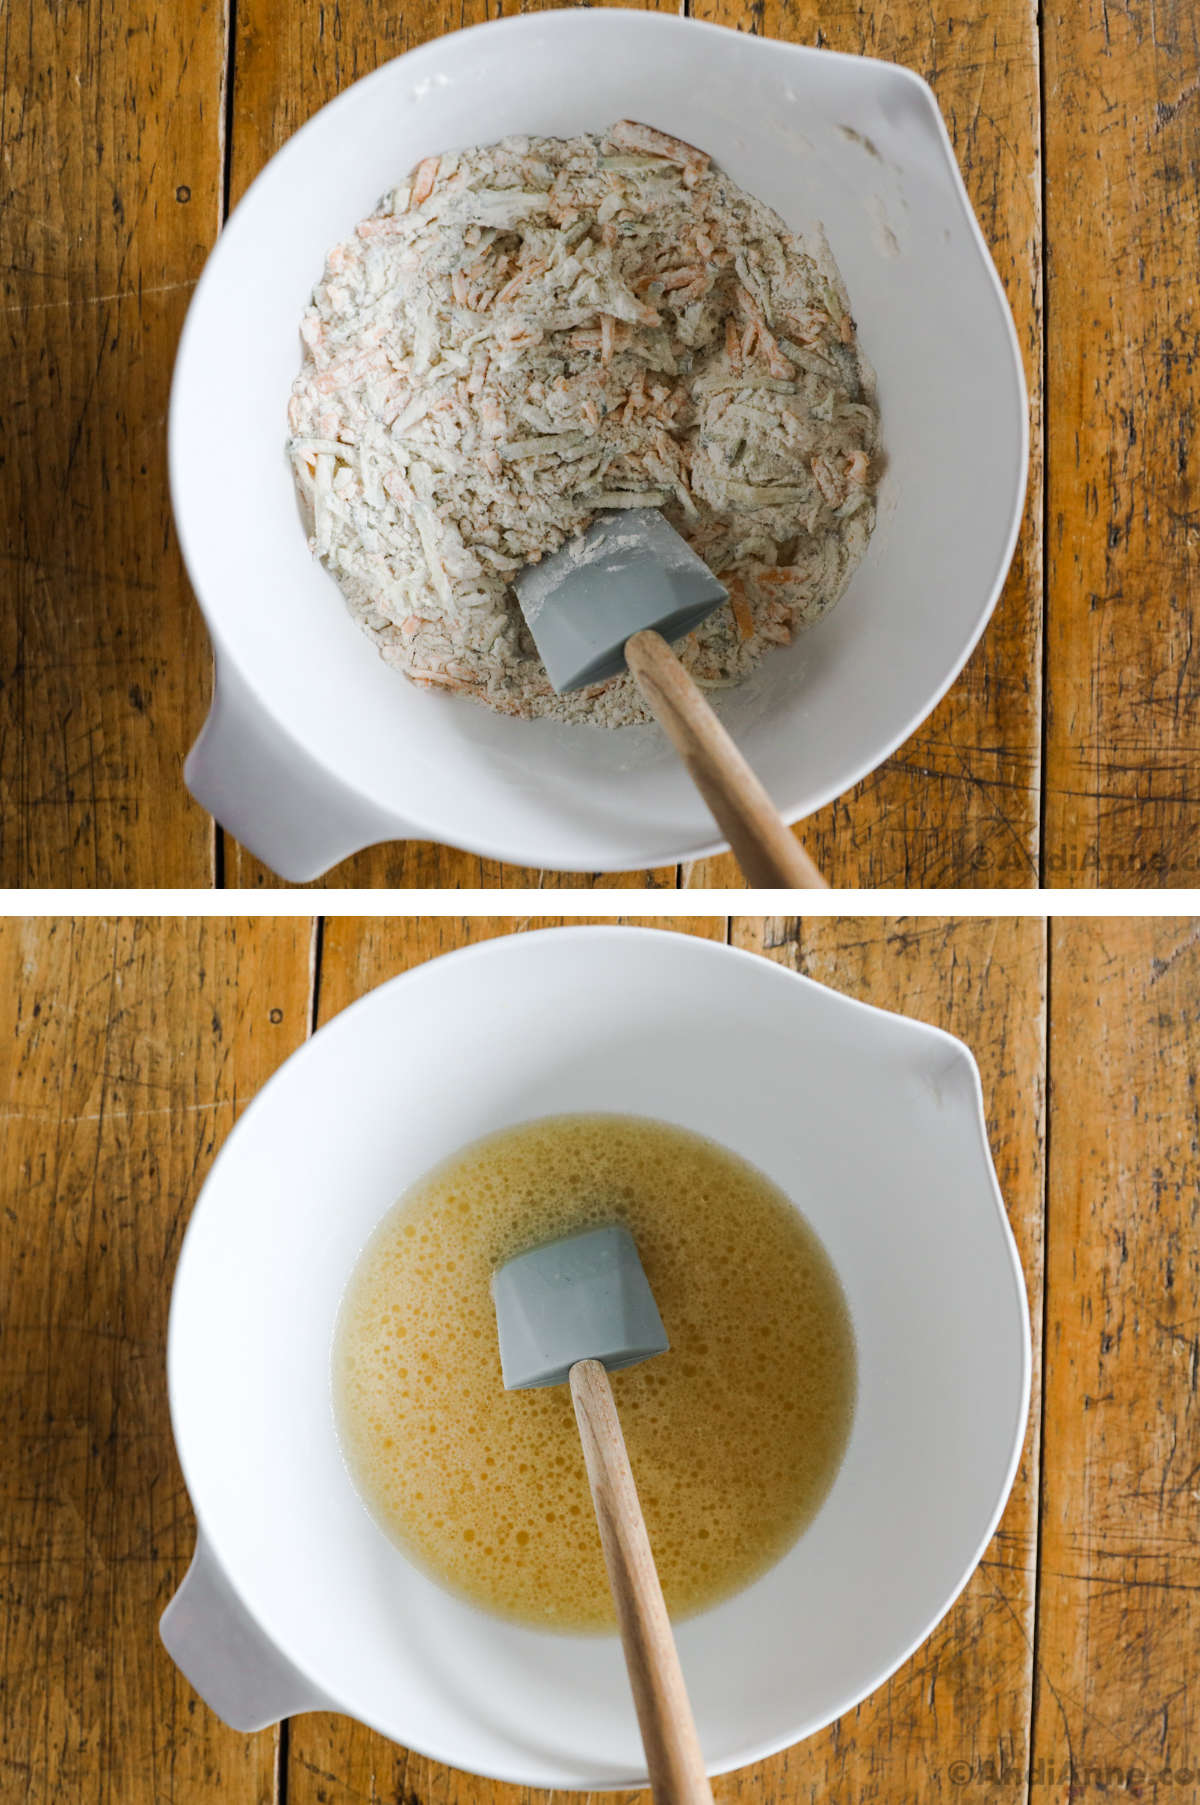 Two overhead images in one: 1. Dry ingredients with shredded cheese, grated zucchini and a spatula. 2. Separate white bowl with beaten egg, oil, honey and beer. 